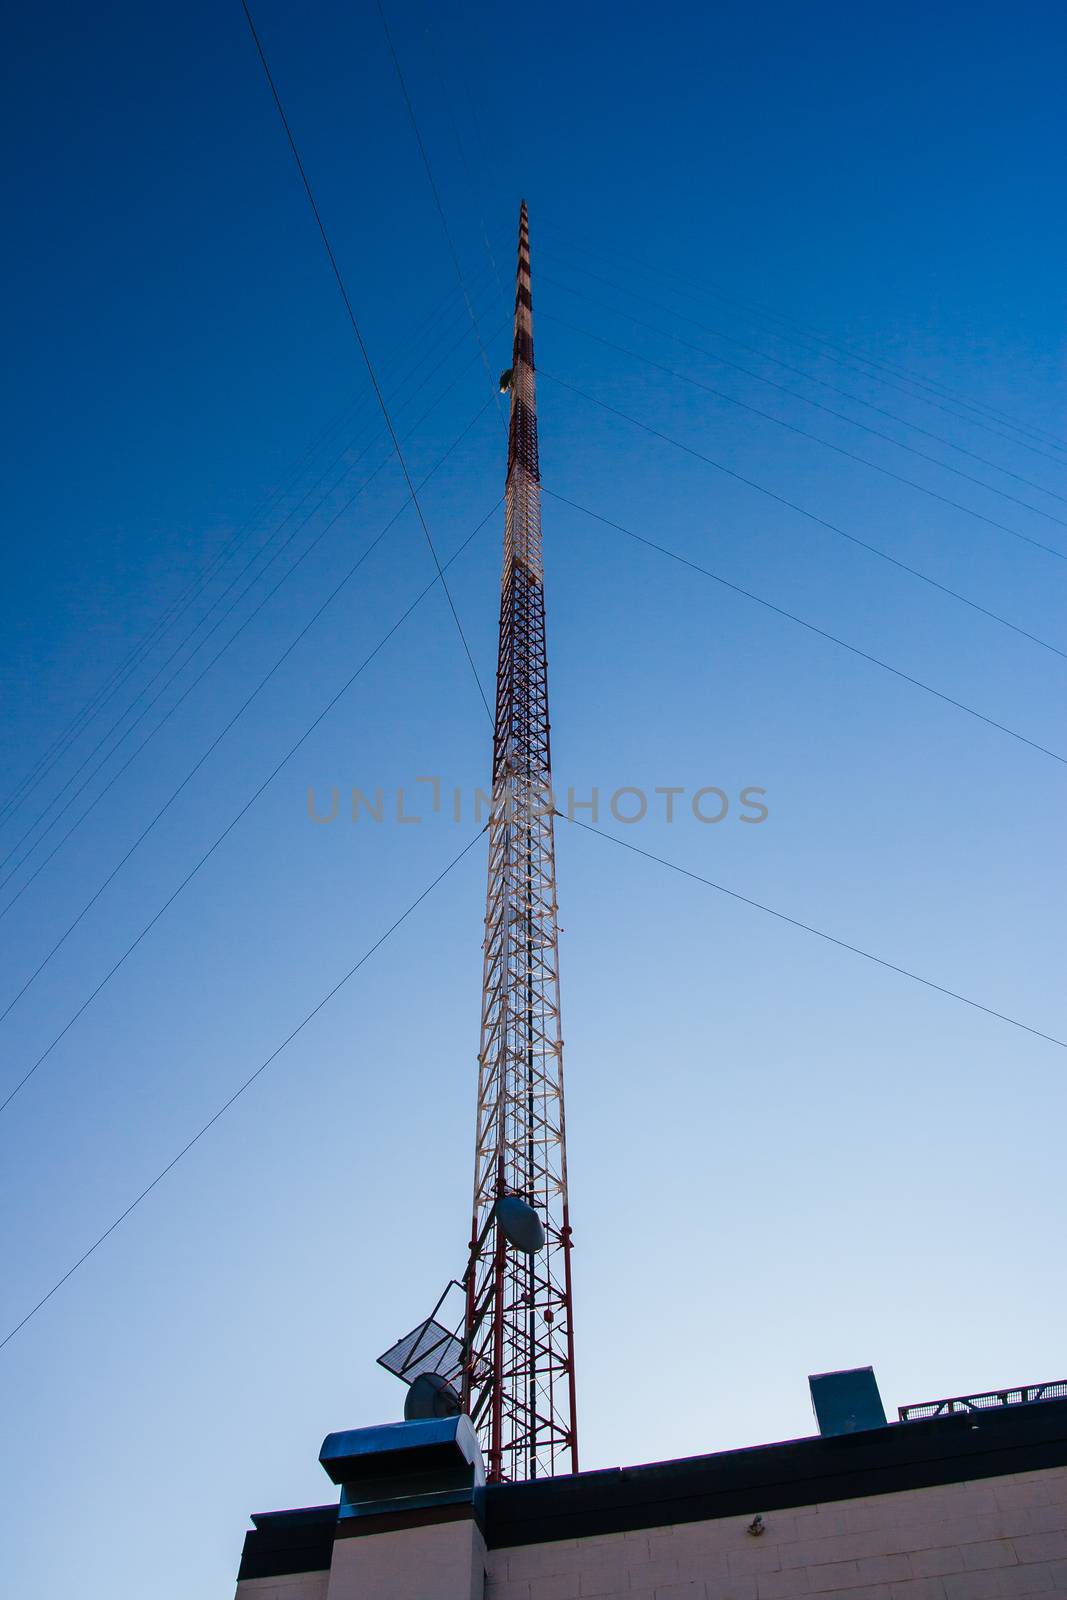 FARGO, USA - April 19 2008: KVLY-TV mast in Blanchard near Fargo in North Dakota, USA. Once the tallest structure in the world